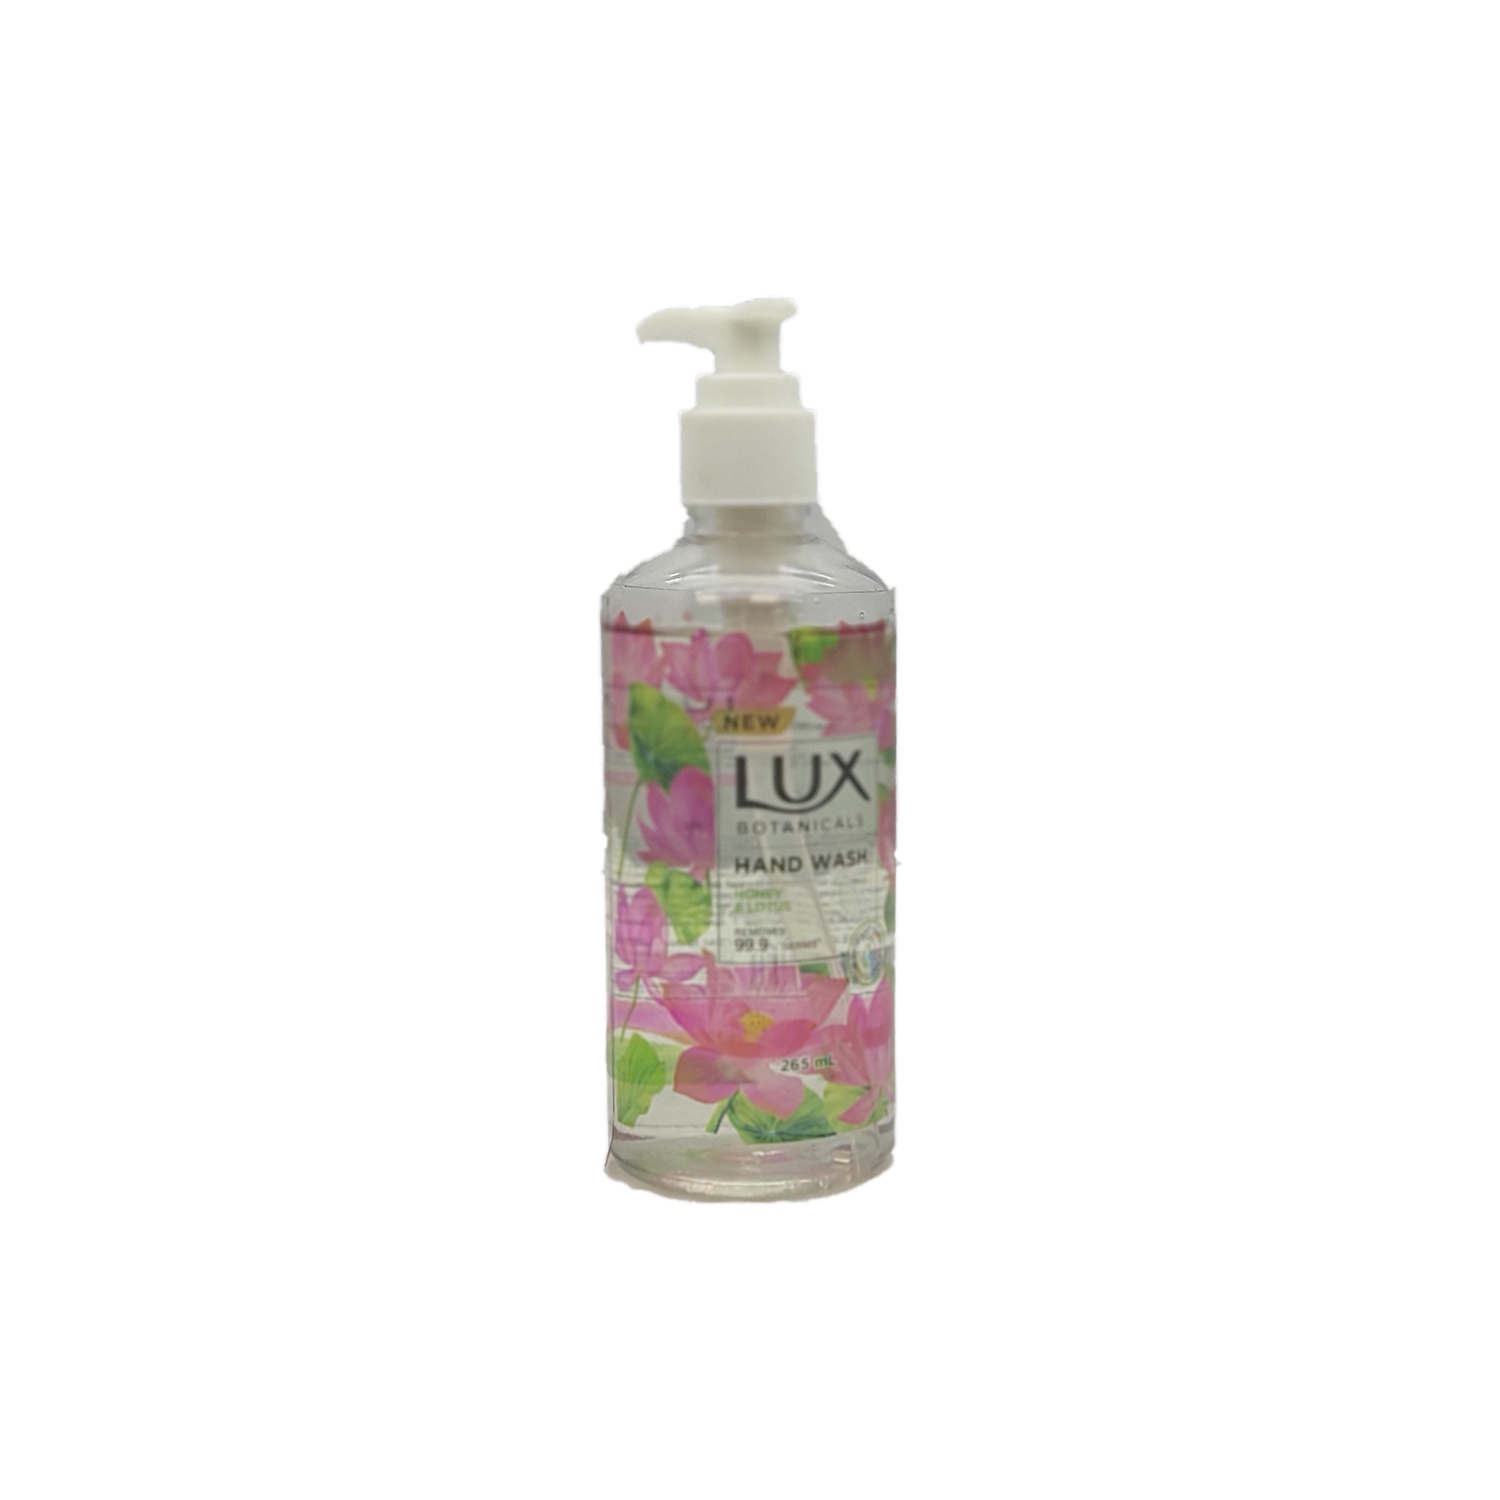 Lux Hand Wash Botanicals Aloe Vera And Camellia 265Ml - LUX - Body Cleansing - in Sri Lanka